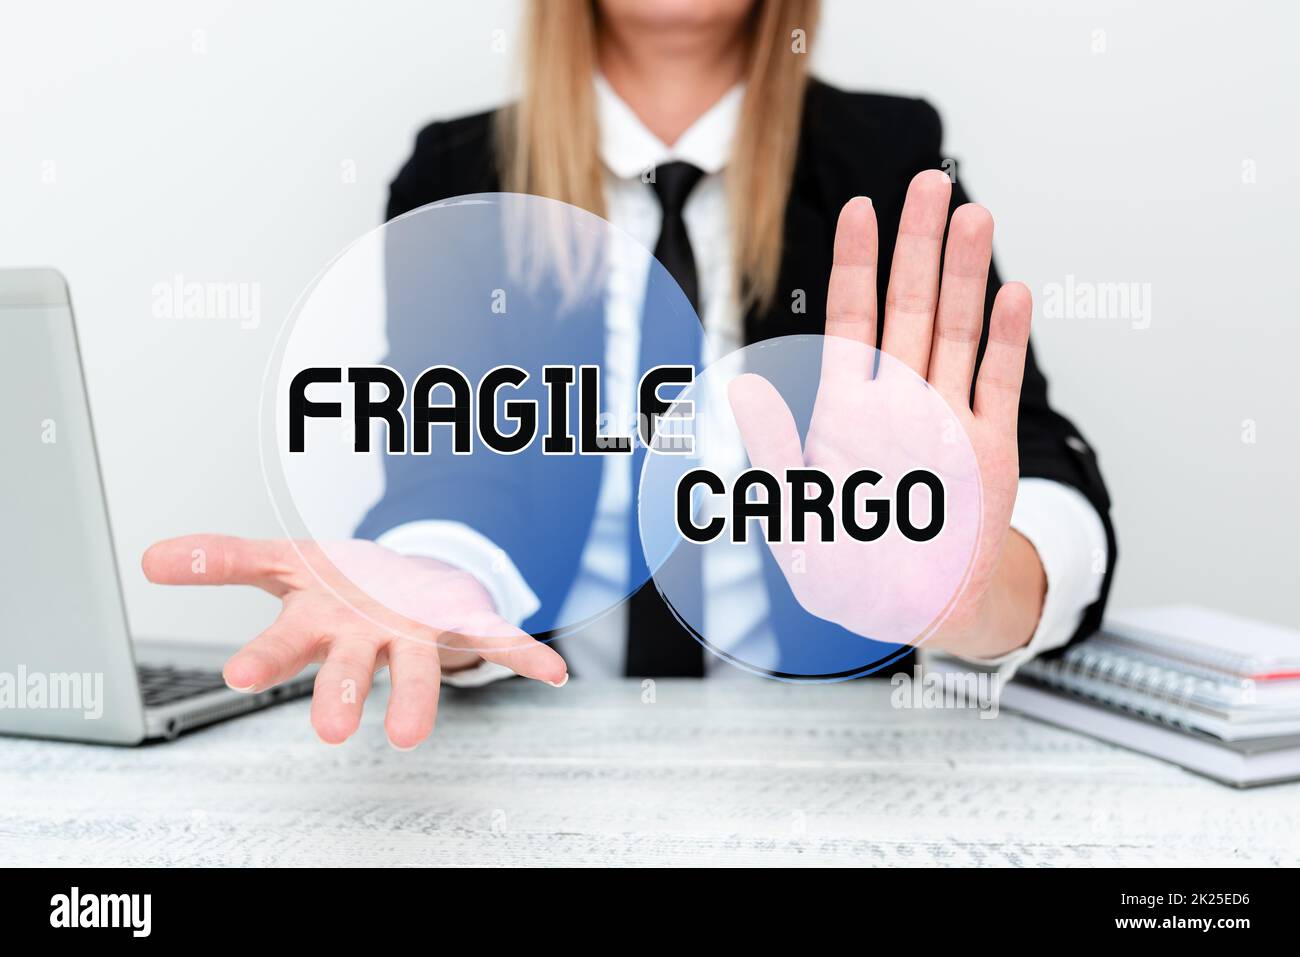 Text sign showing Fragile Cargo. Business idea Breakable Handle with Care Bubble Wrap Glass Hazardous Goods Explaining Company Problem, Abstract Providing Dispute Solutions Stock Photo